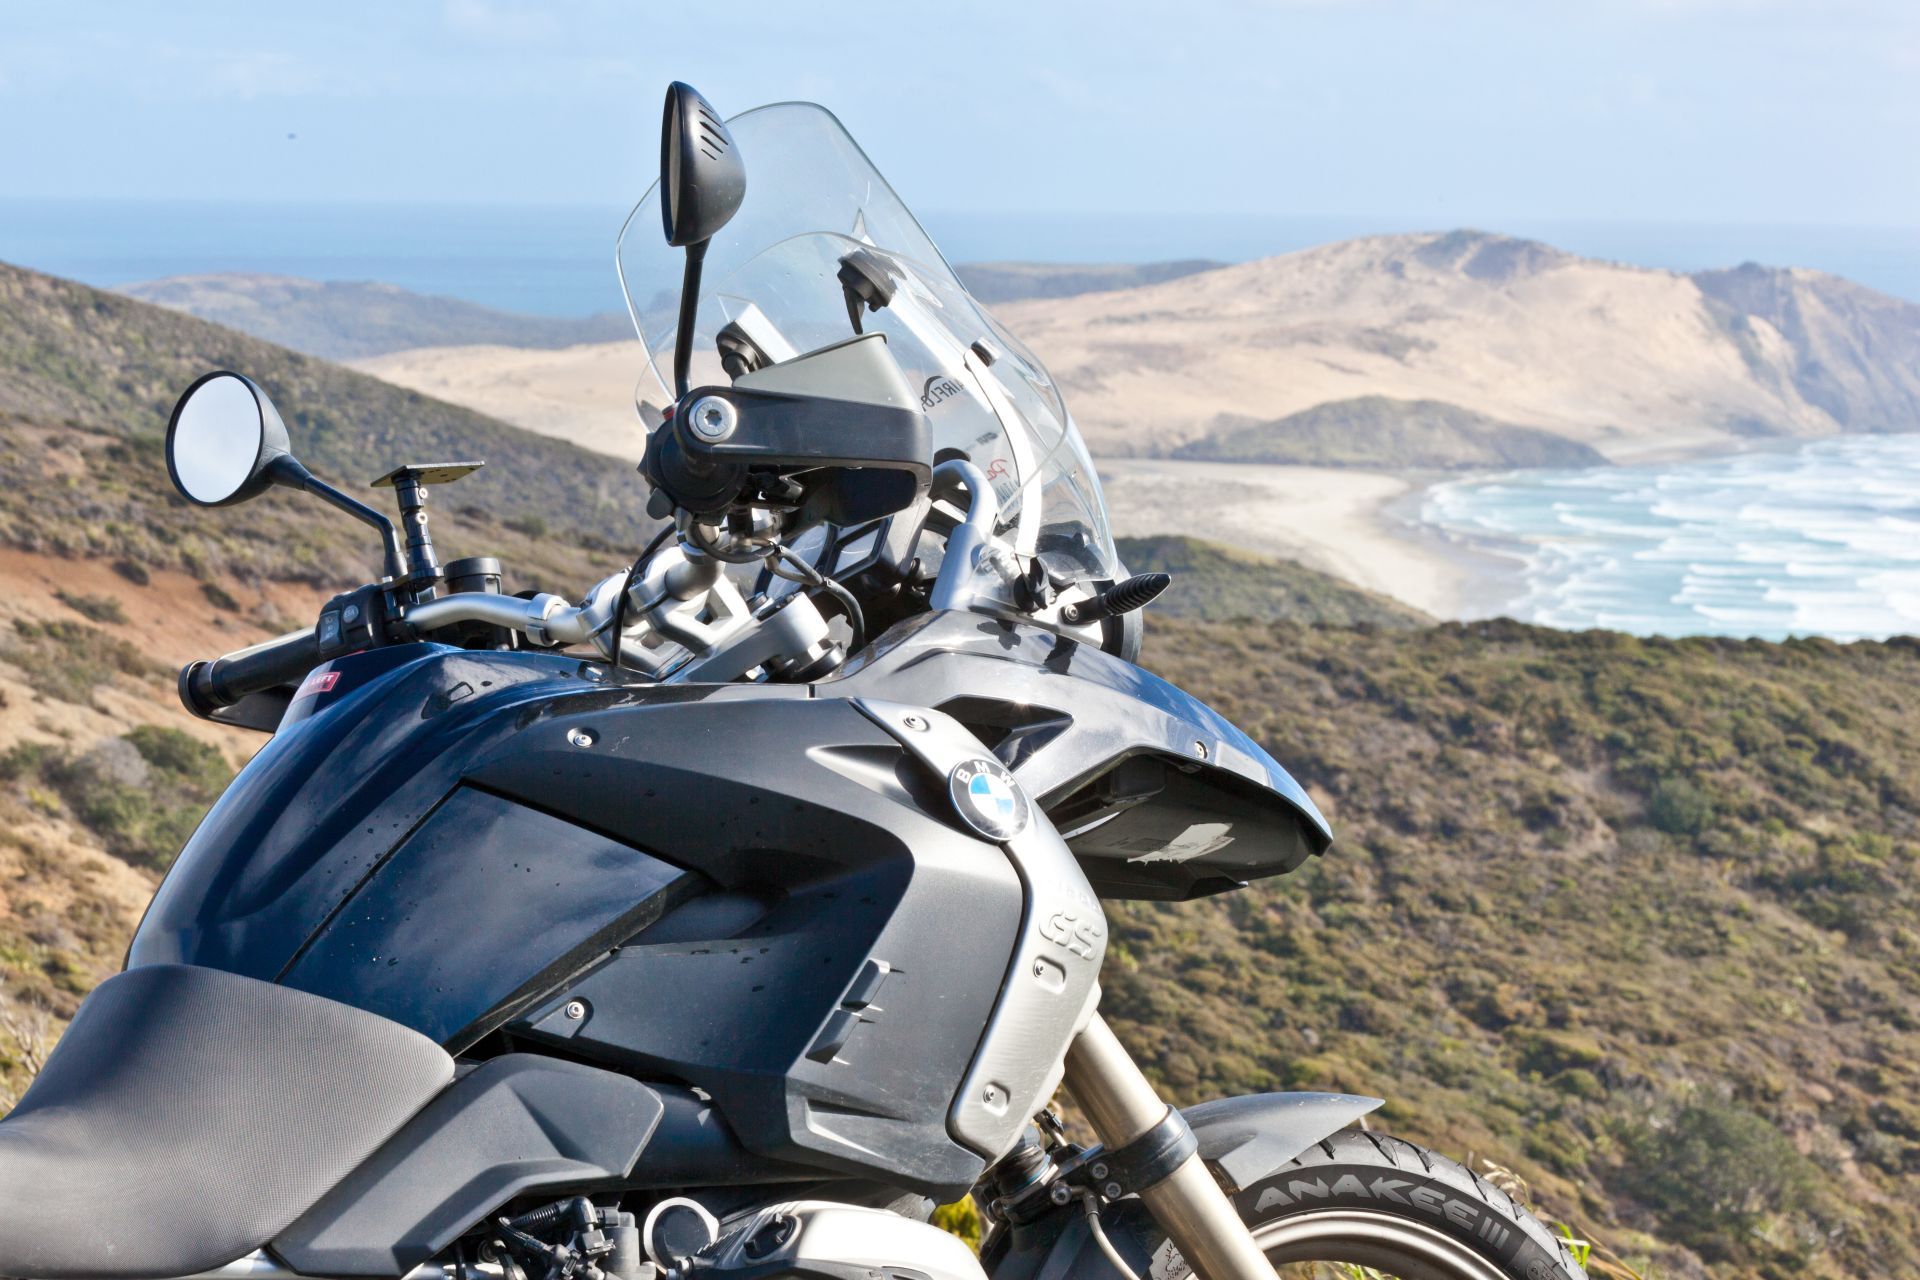 32 Best Motorcycle hire auckland nz for Ideas